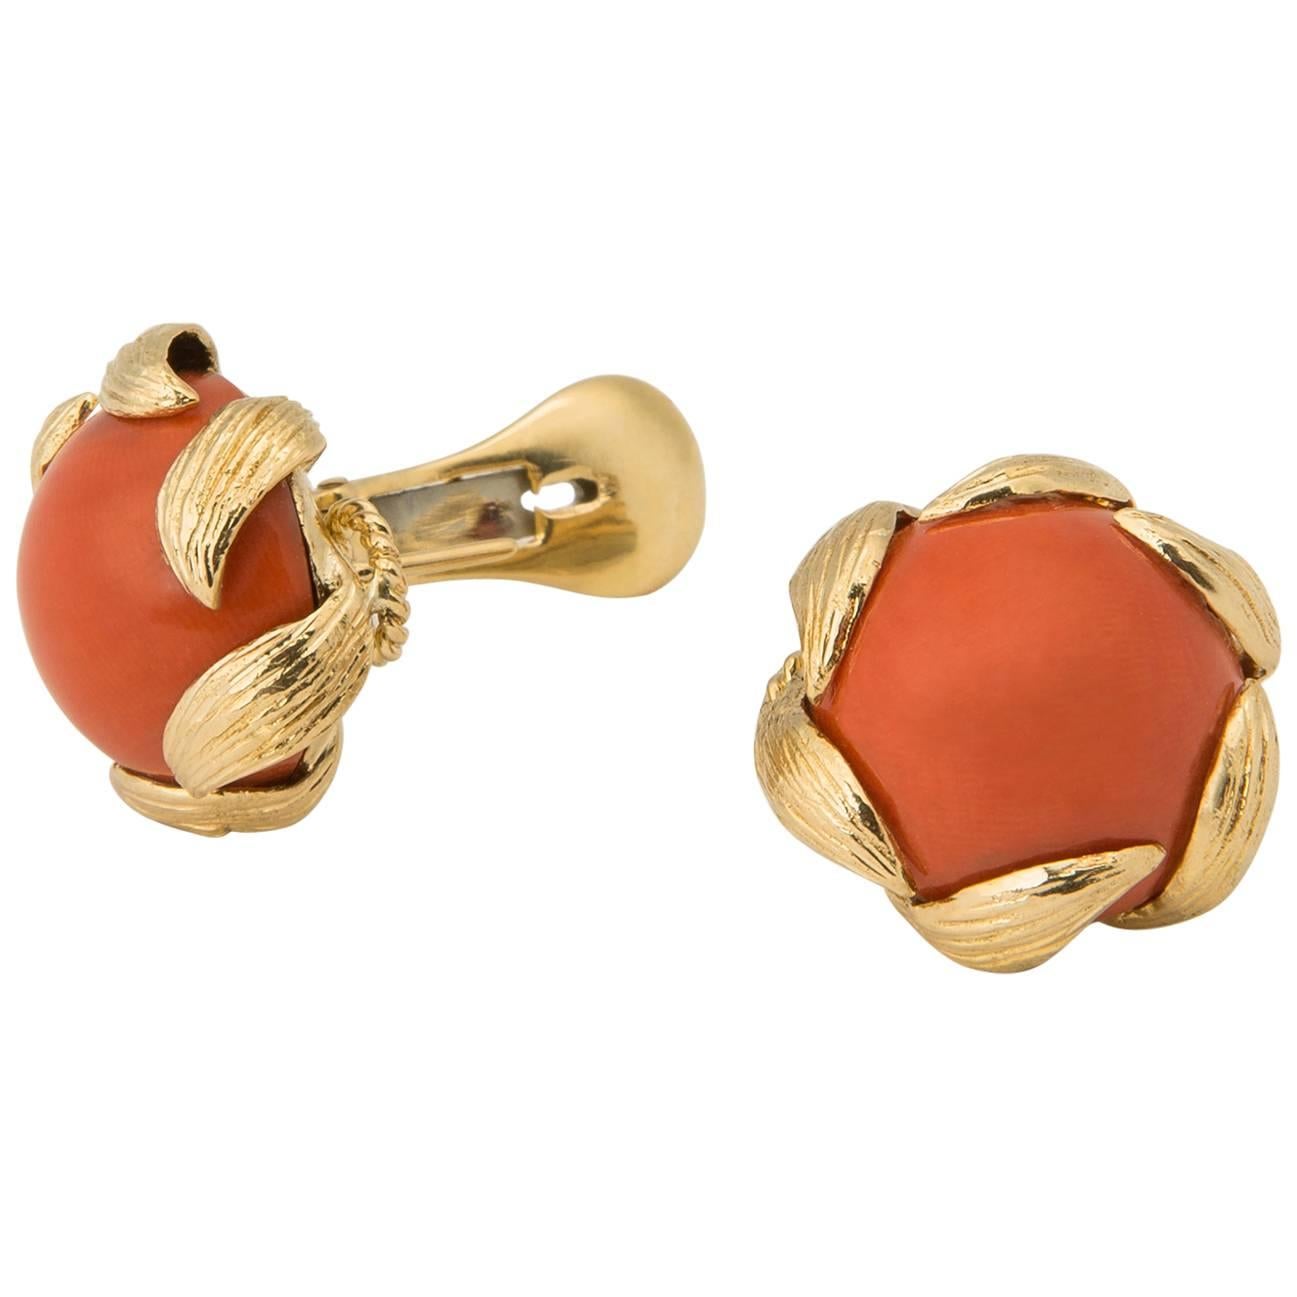 A wearable Iconic David Webb Creation. Deep rich orange coral is finished with elegant floral motif frames. An easy to wear 3/4 inch size. 